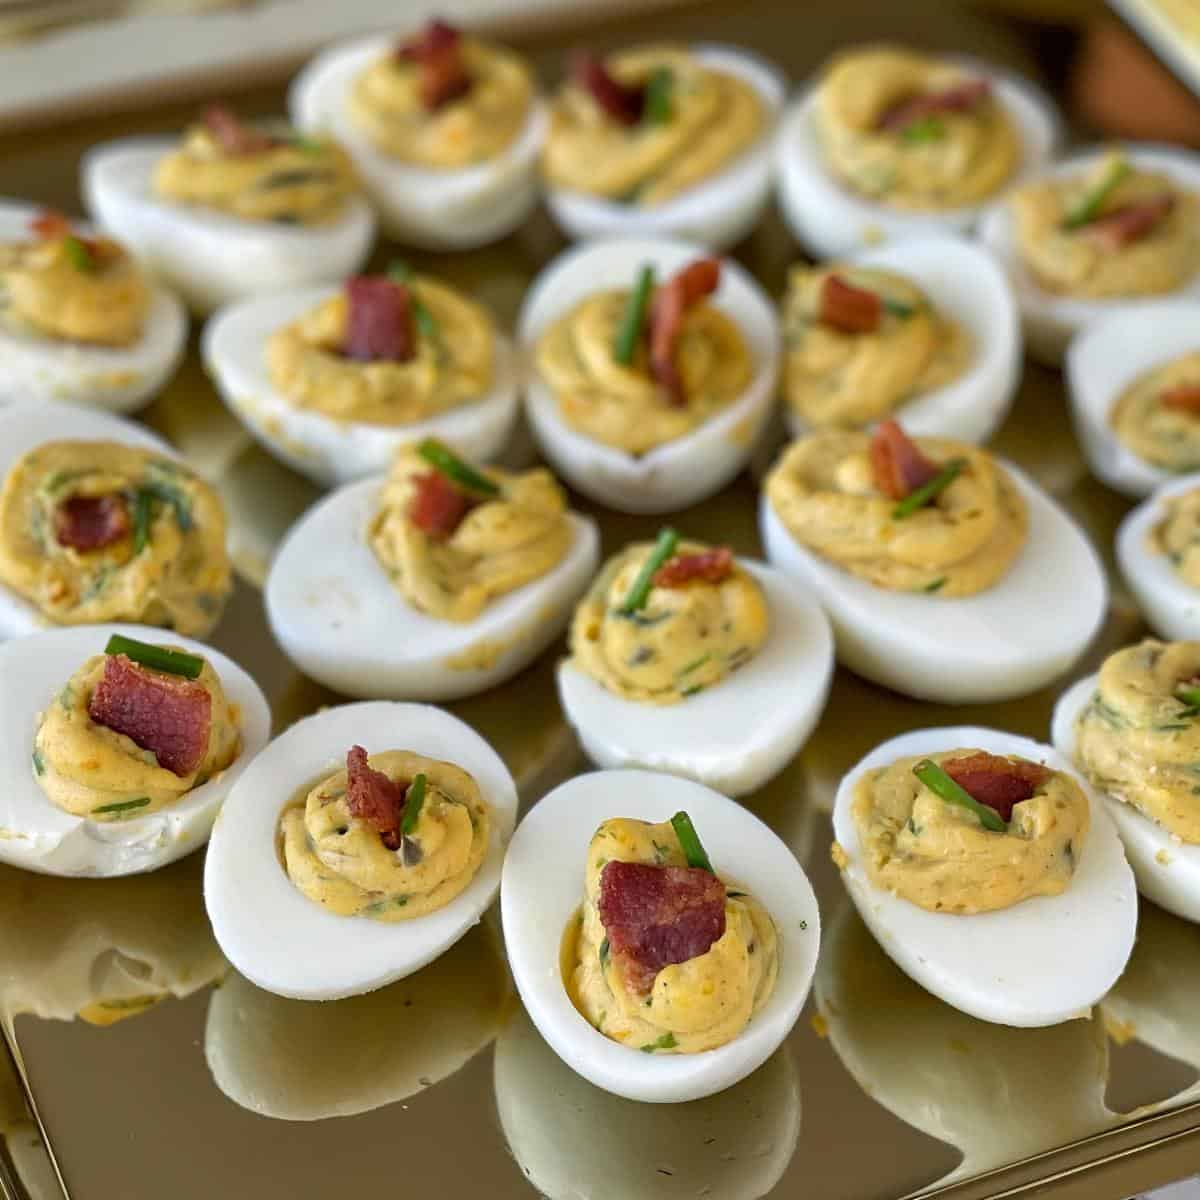 Assembled curried eggs on a gold platter